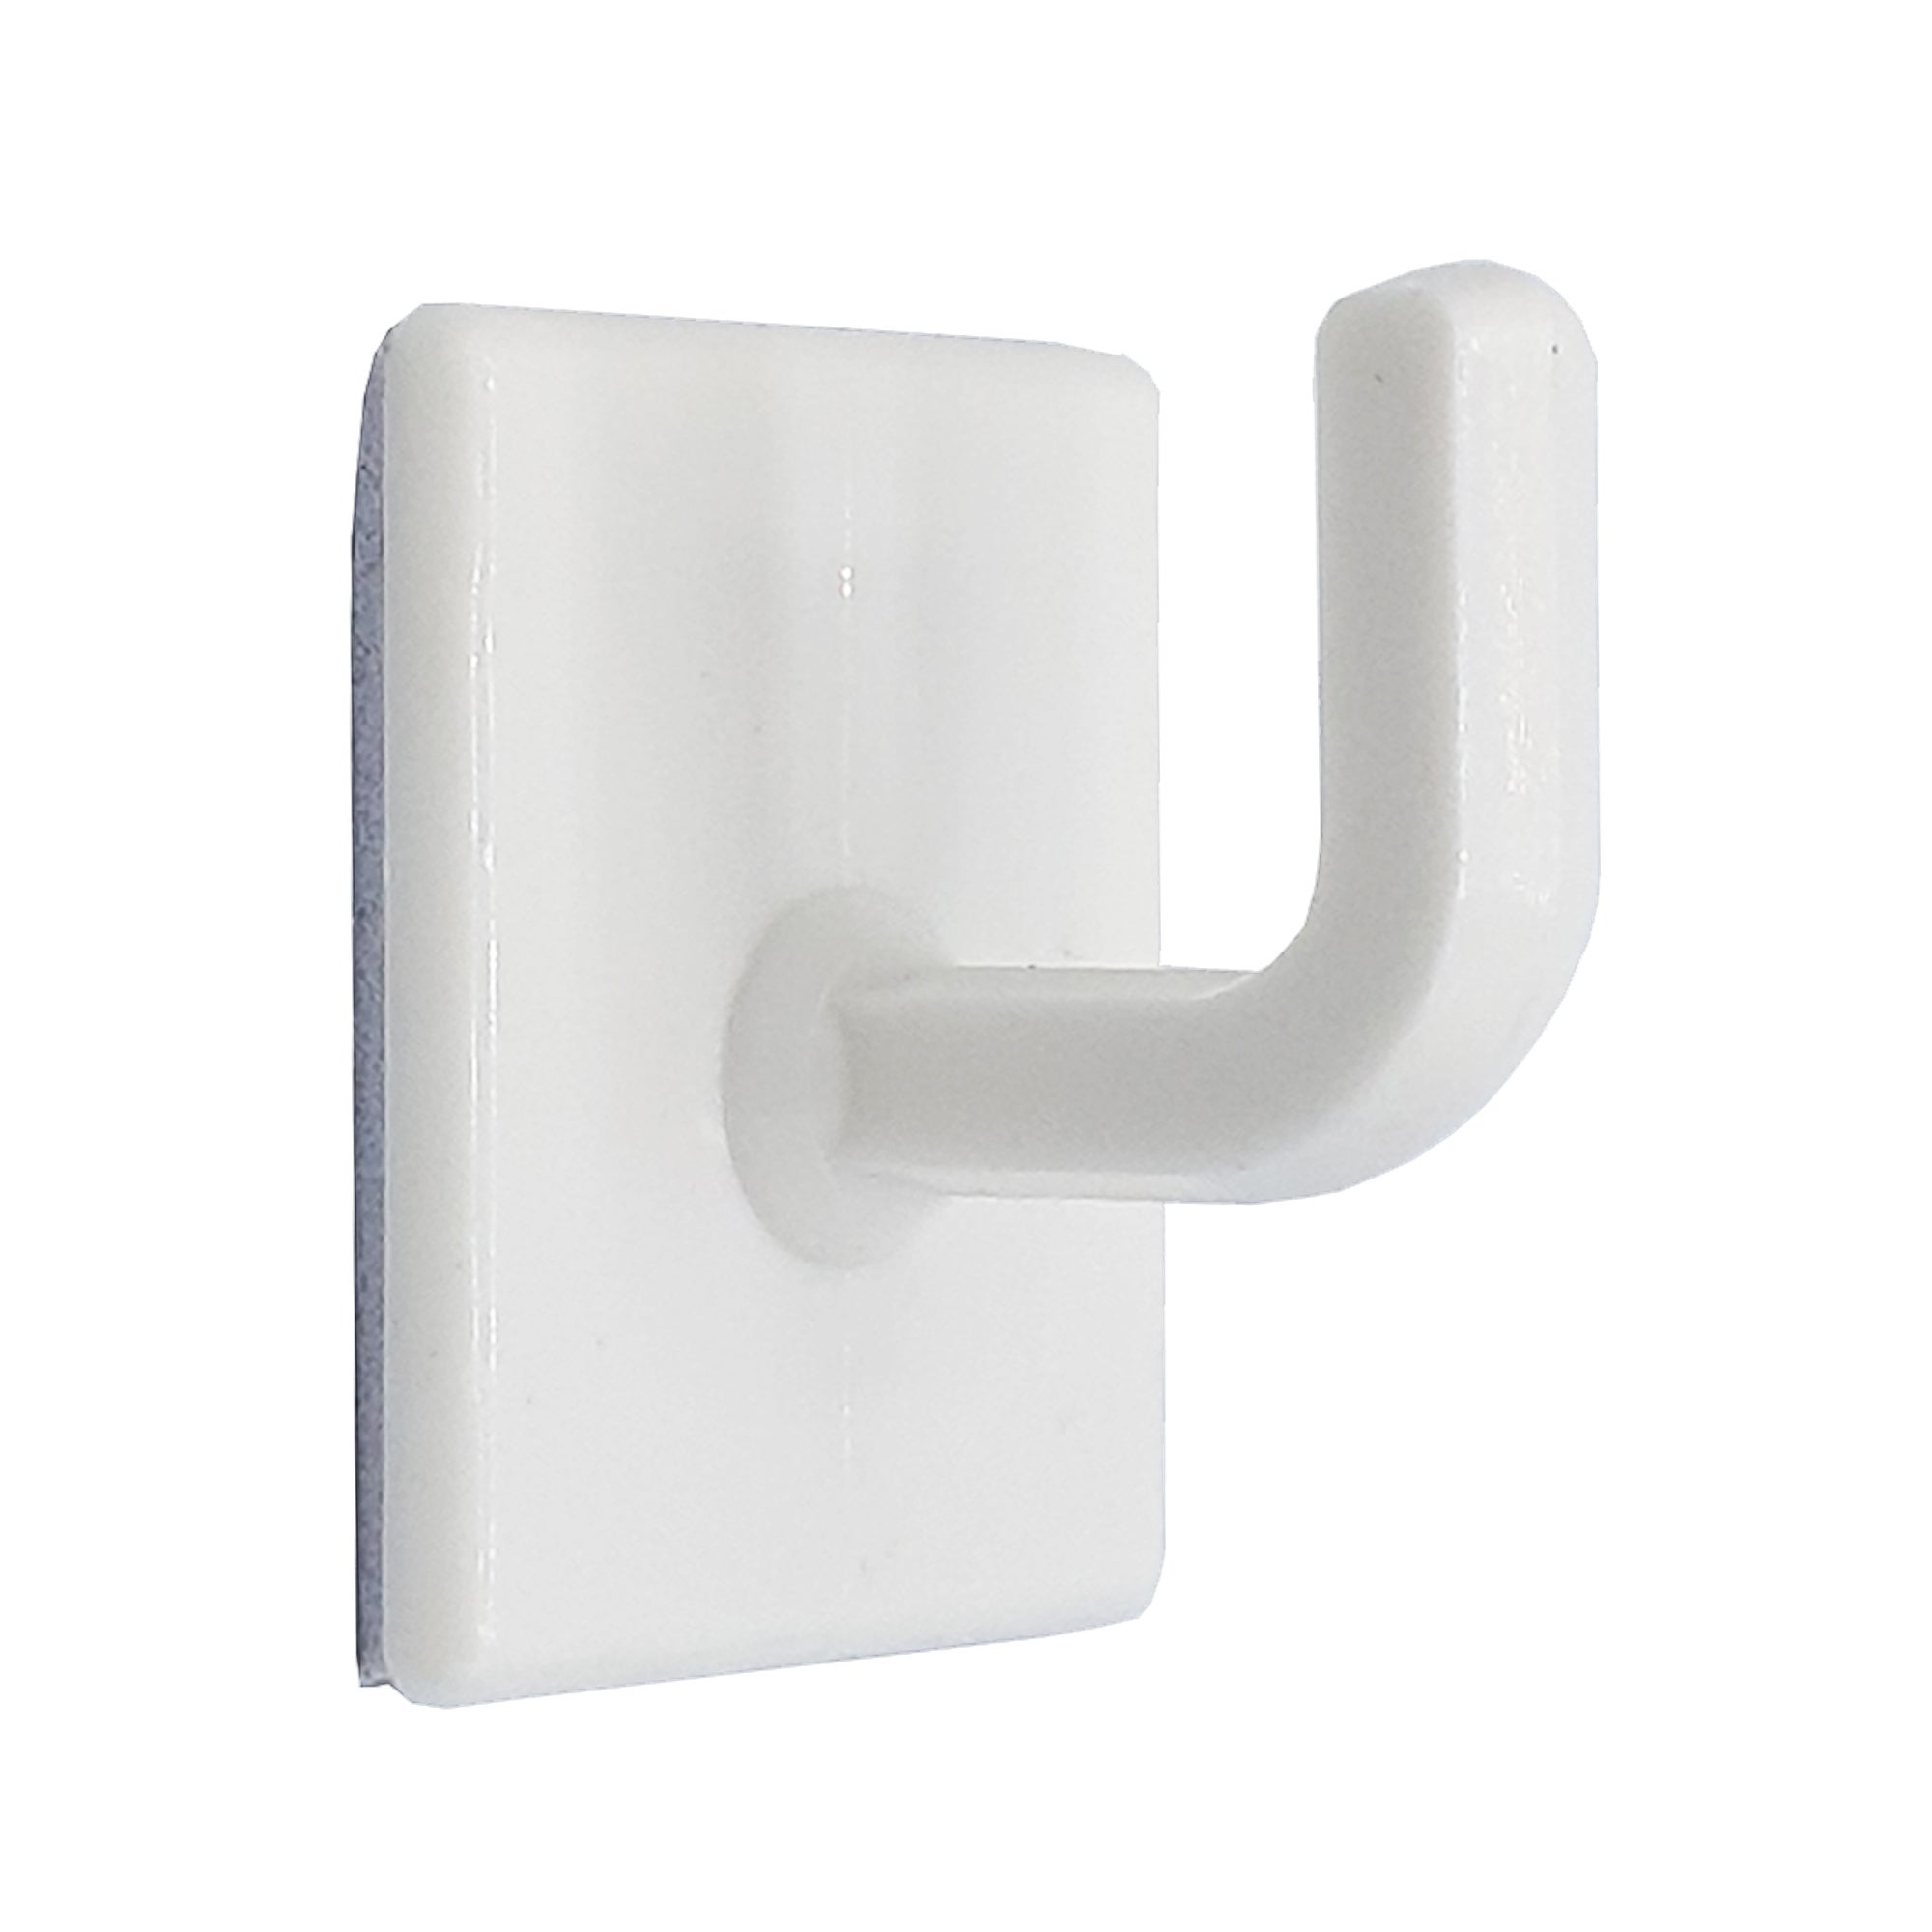 Self Adhesive Kitchen Calender Hooks Pack of 10 White